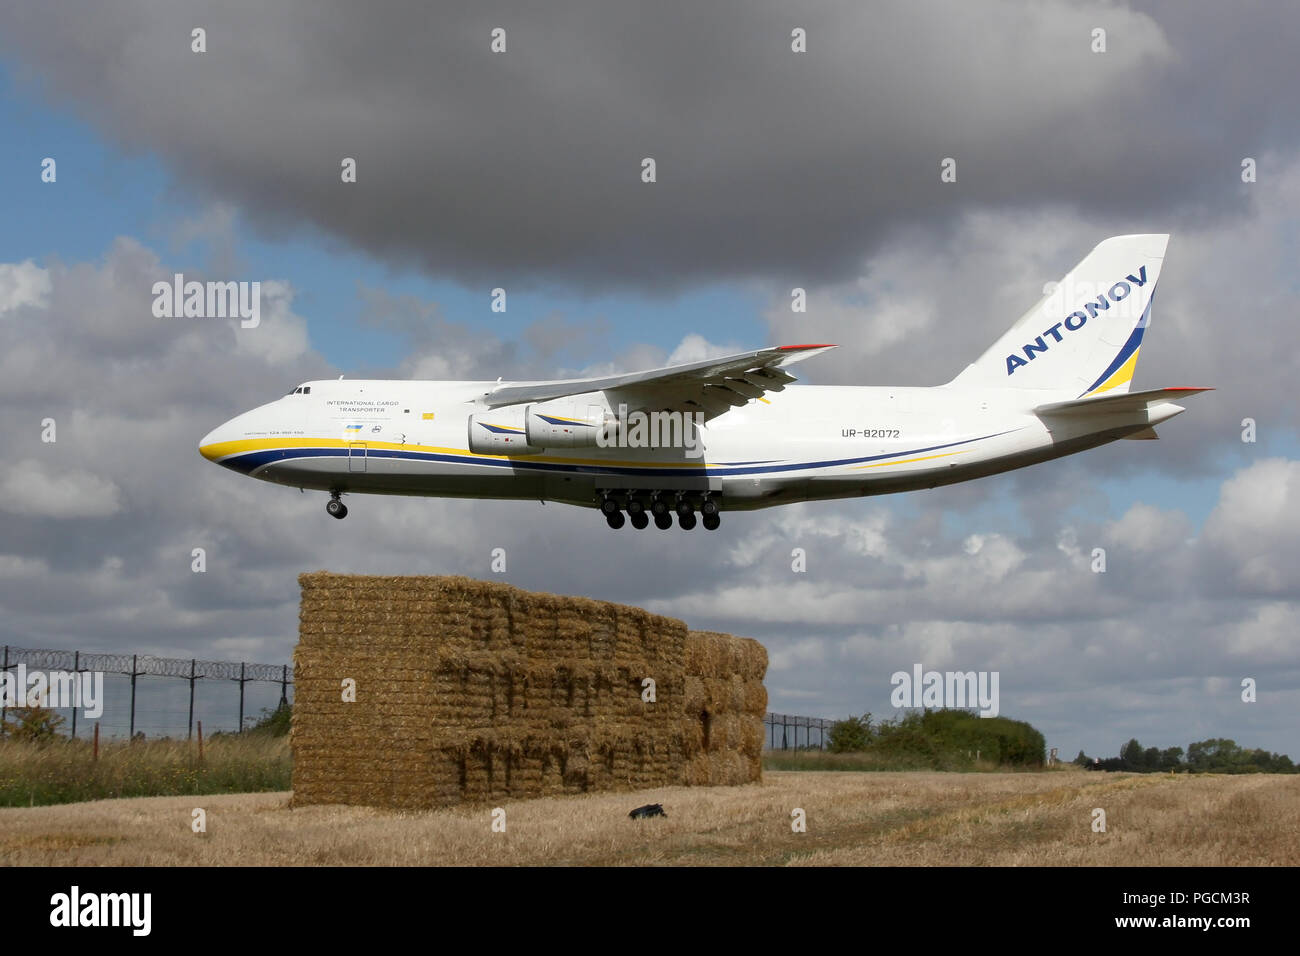 Antonov Airlines An-124 on approach into Wattisham Airfield, Suffolk. This large cargo aircraft is returning AAC Apaches helicopters from the USA. Stock Photo